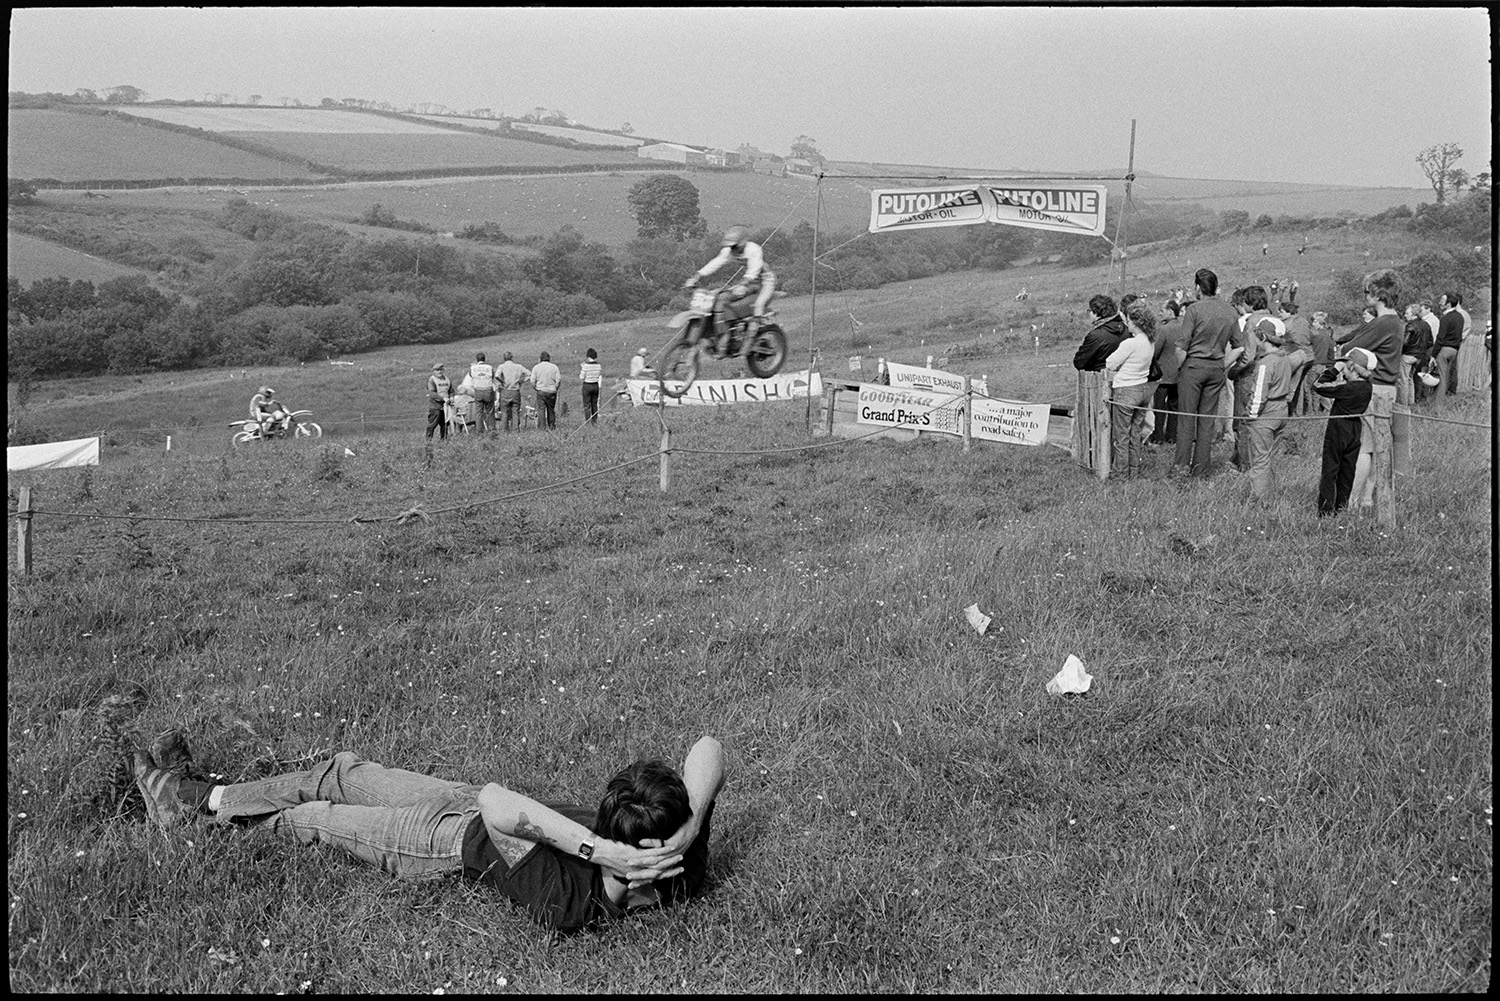 Motorcycle scramble competitors waiting to start racing and jumping at start line. 
[Spectators watching competitors jumping a ramp at the start of a motorcycle scramble in a field at Torrington. Other competitors can be seen racing around the course in the background.]